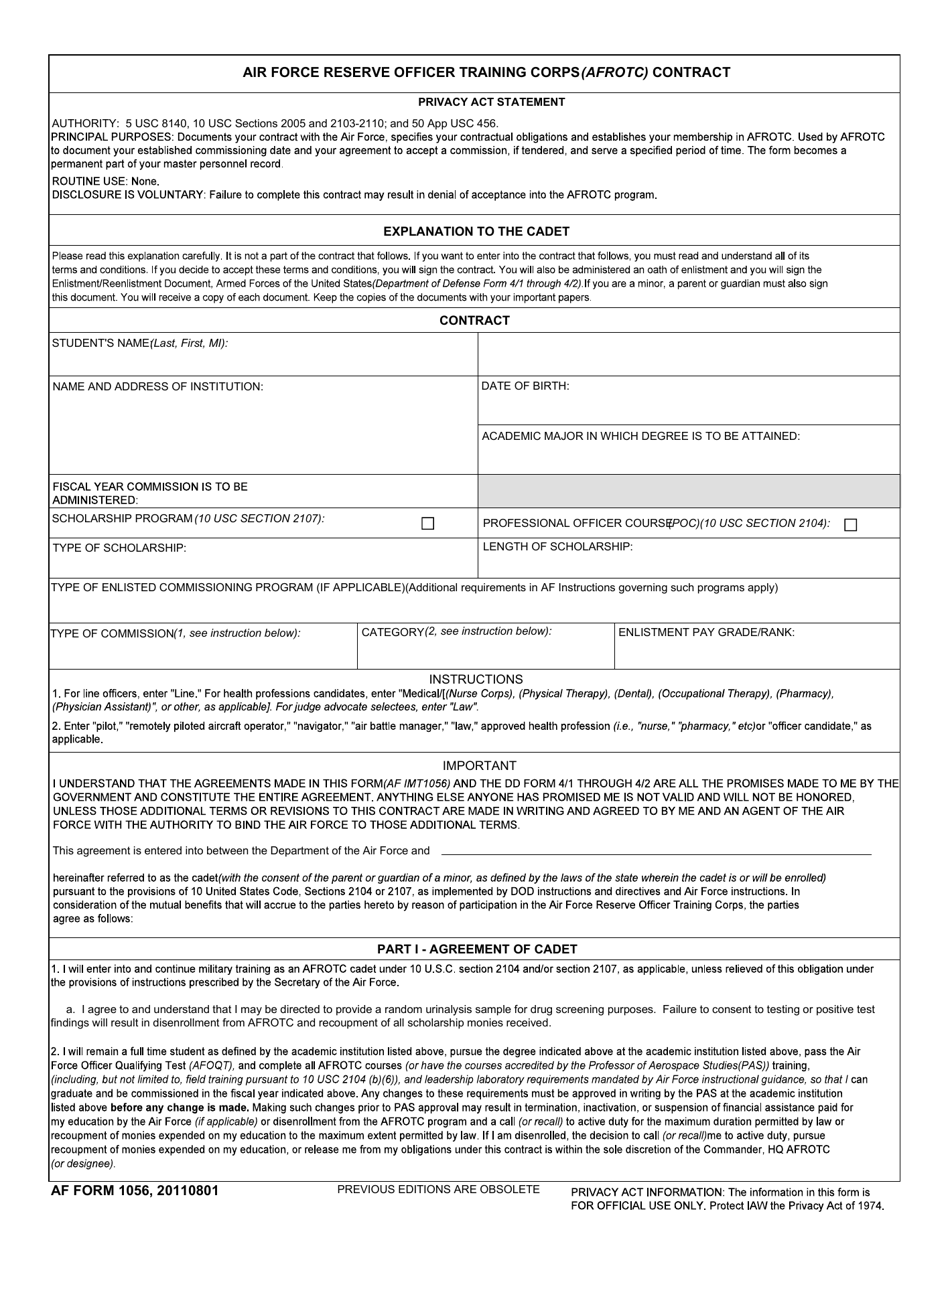 AF Form 1056 Air Force Reserve Officer Training Corps (AFROTC) Contract, Page 1